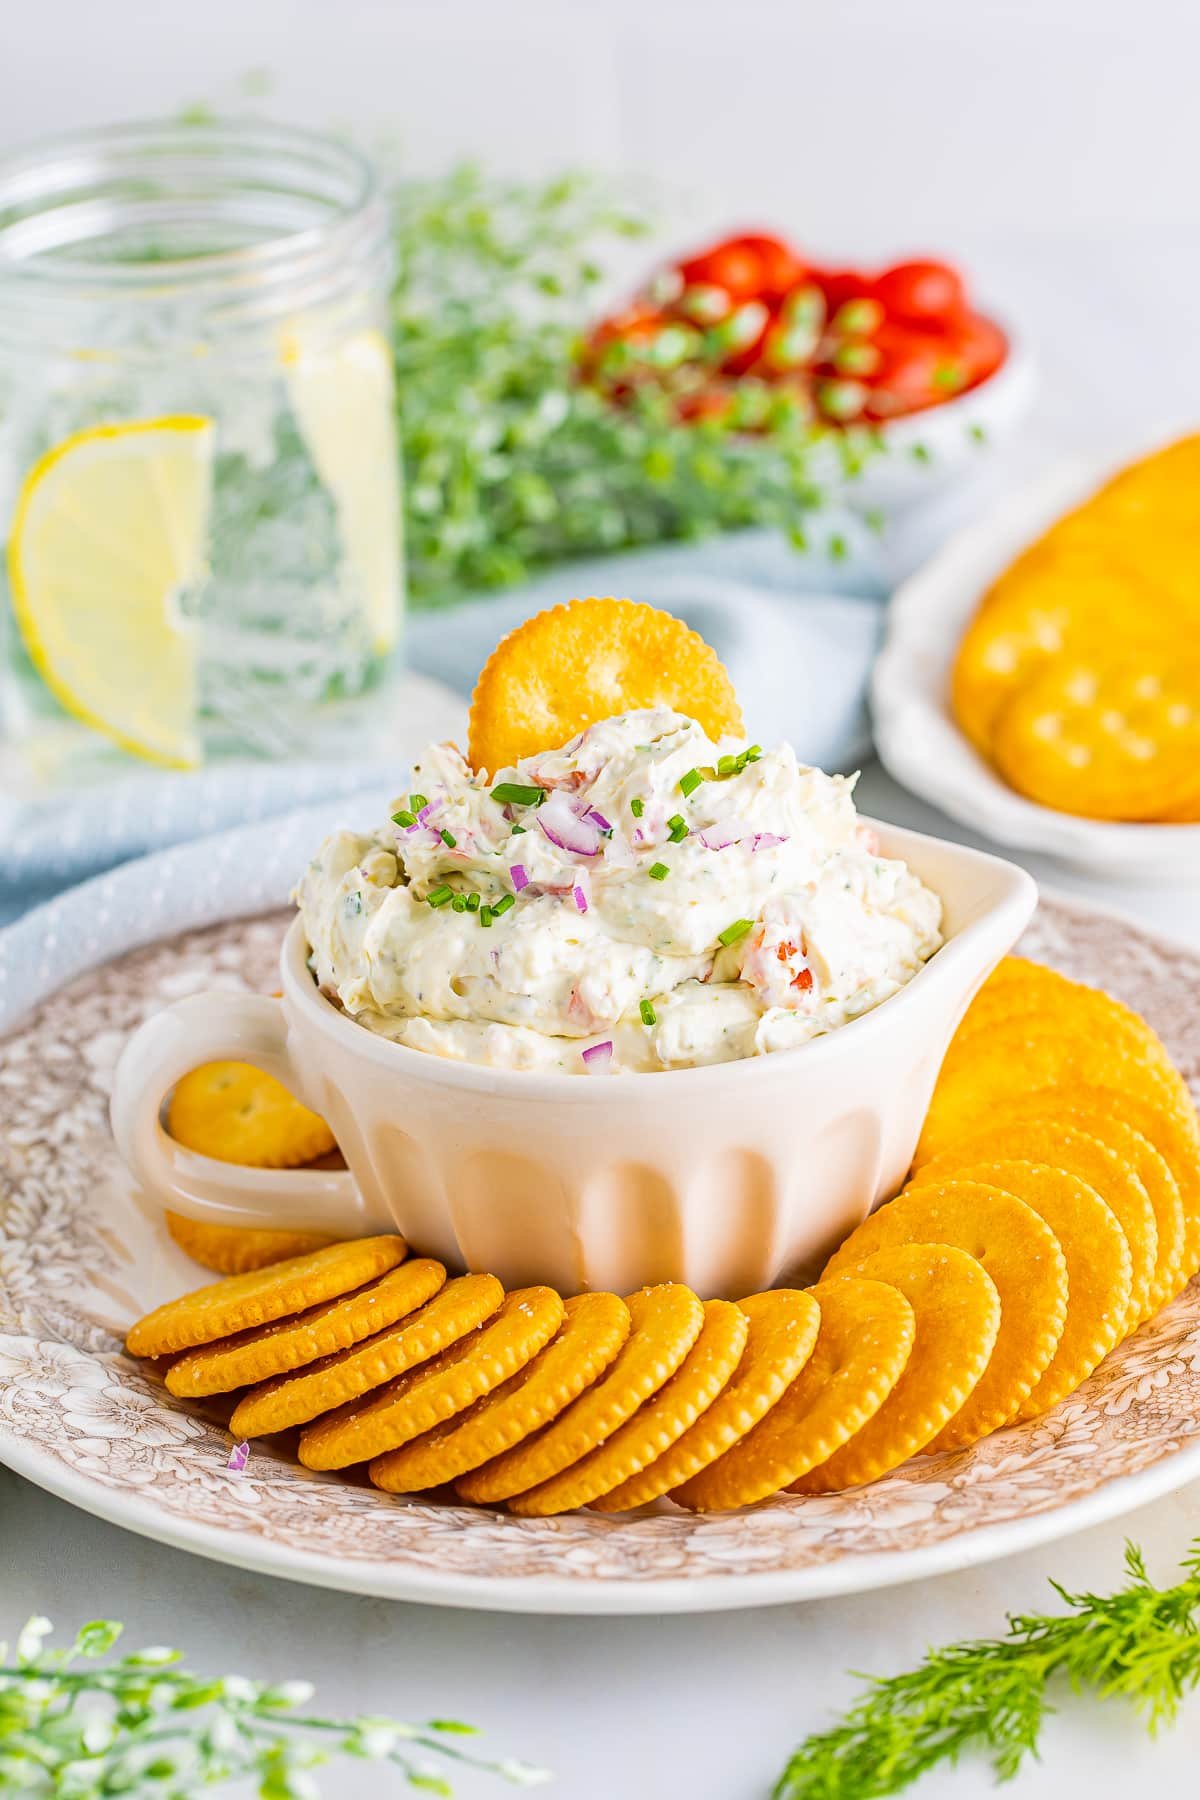 Smoked salmon cream cheese dip served in an ivory measuring cup on a vintage plate with crackers, iced water with lemon, tomatoes, and blue linen in background